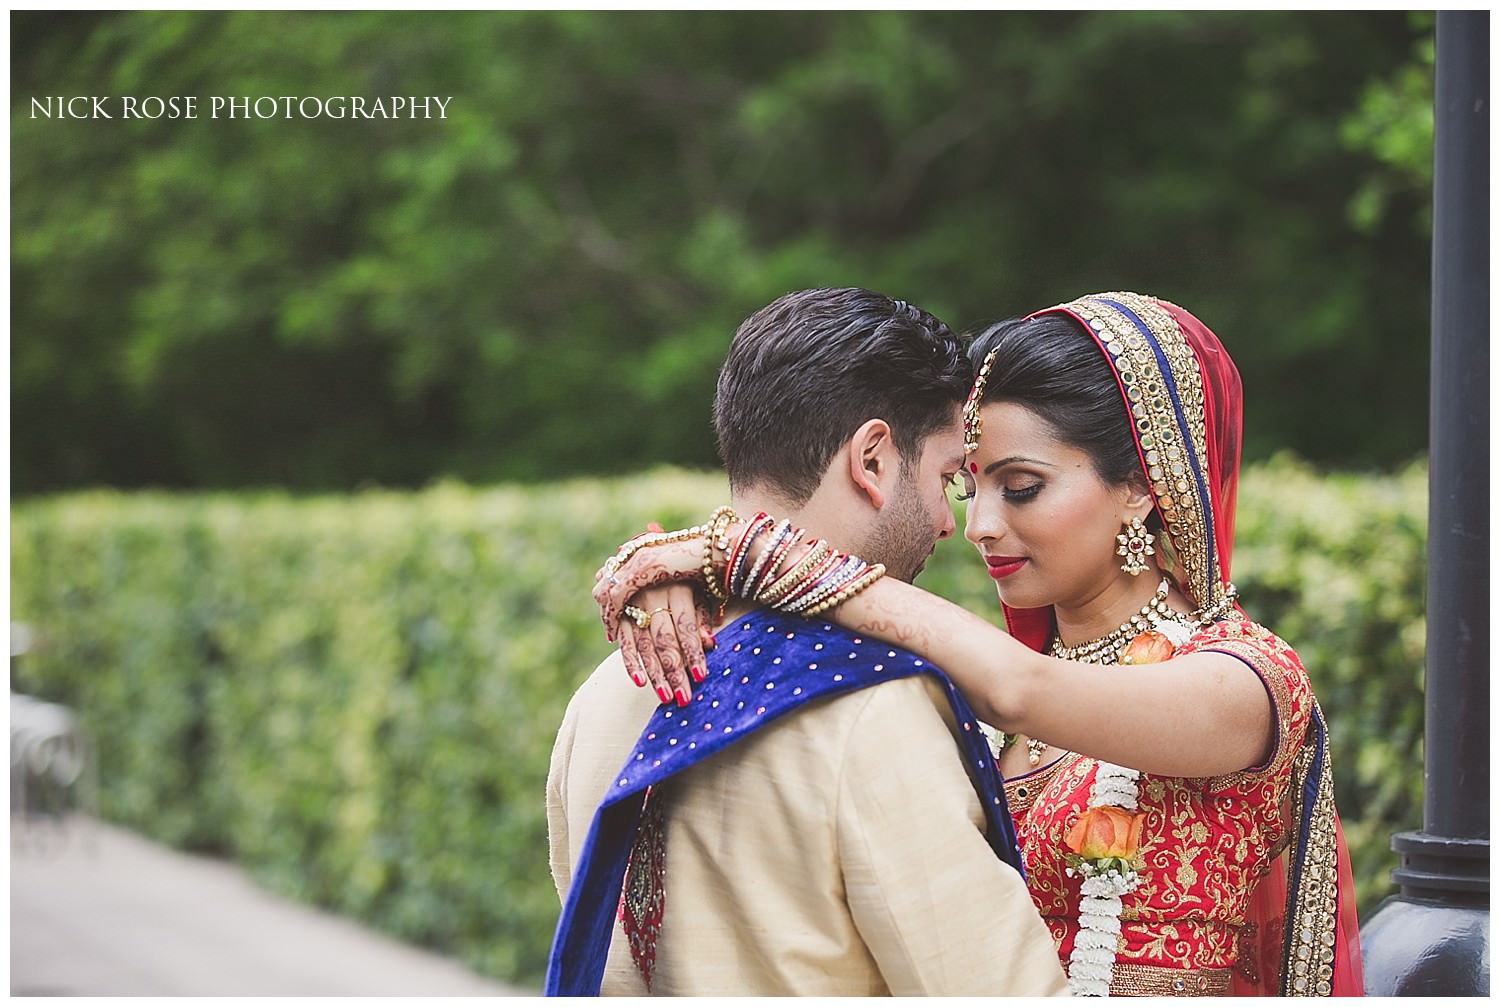  Hindu wedding portraits with the Indian bride and groom at an East Wintergarden wedding 